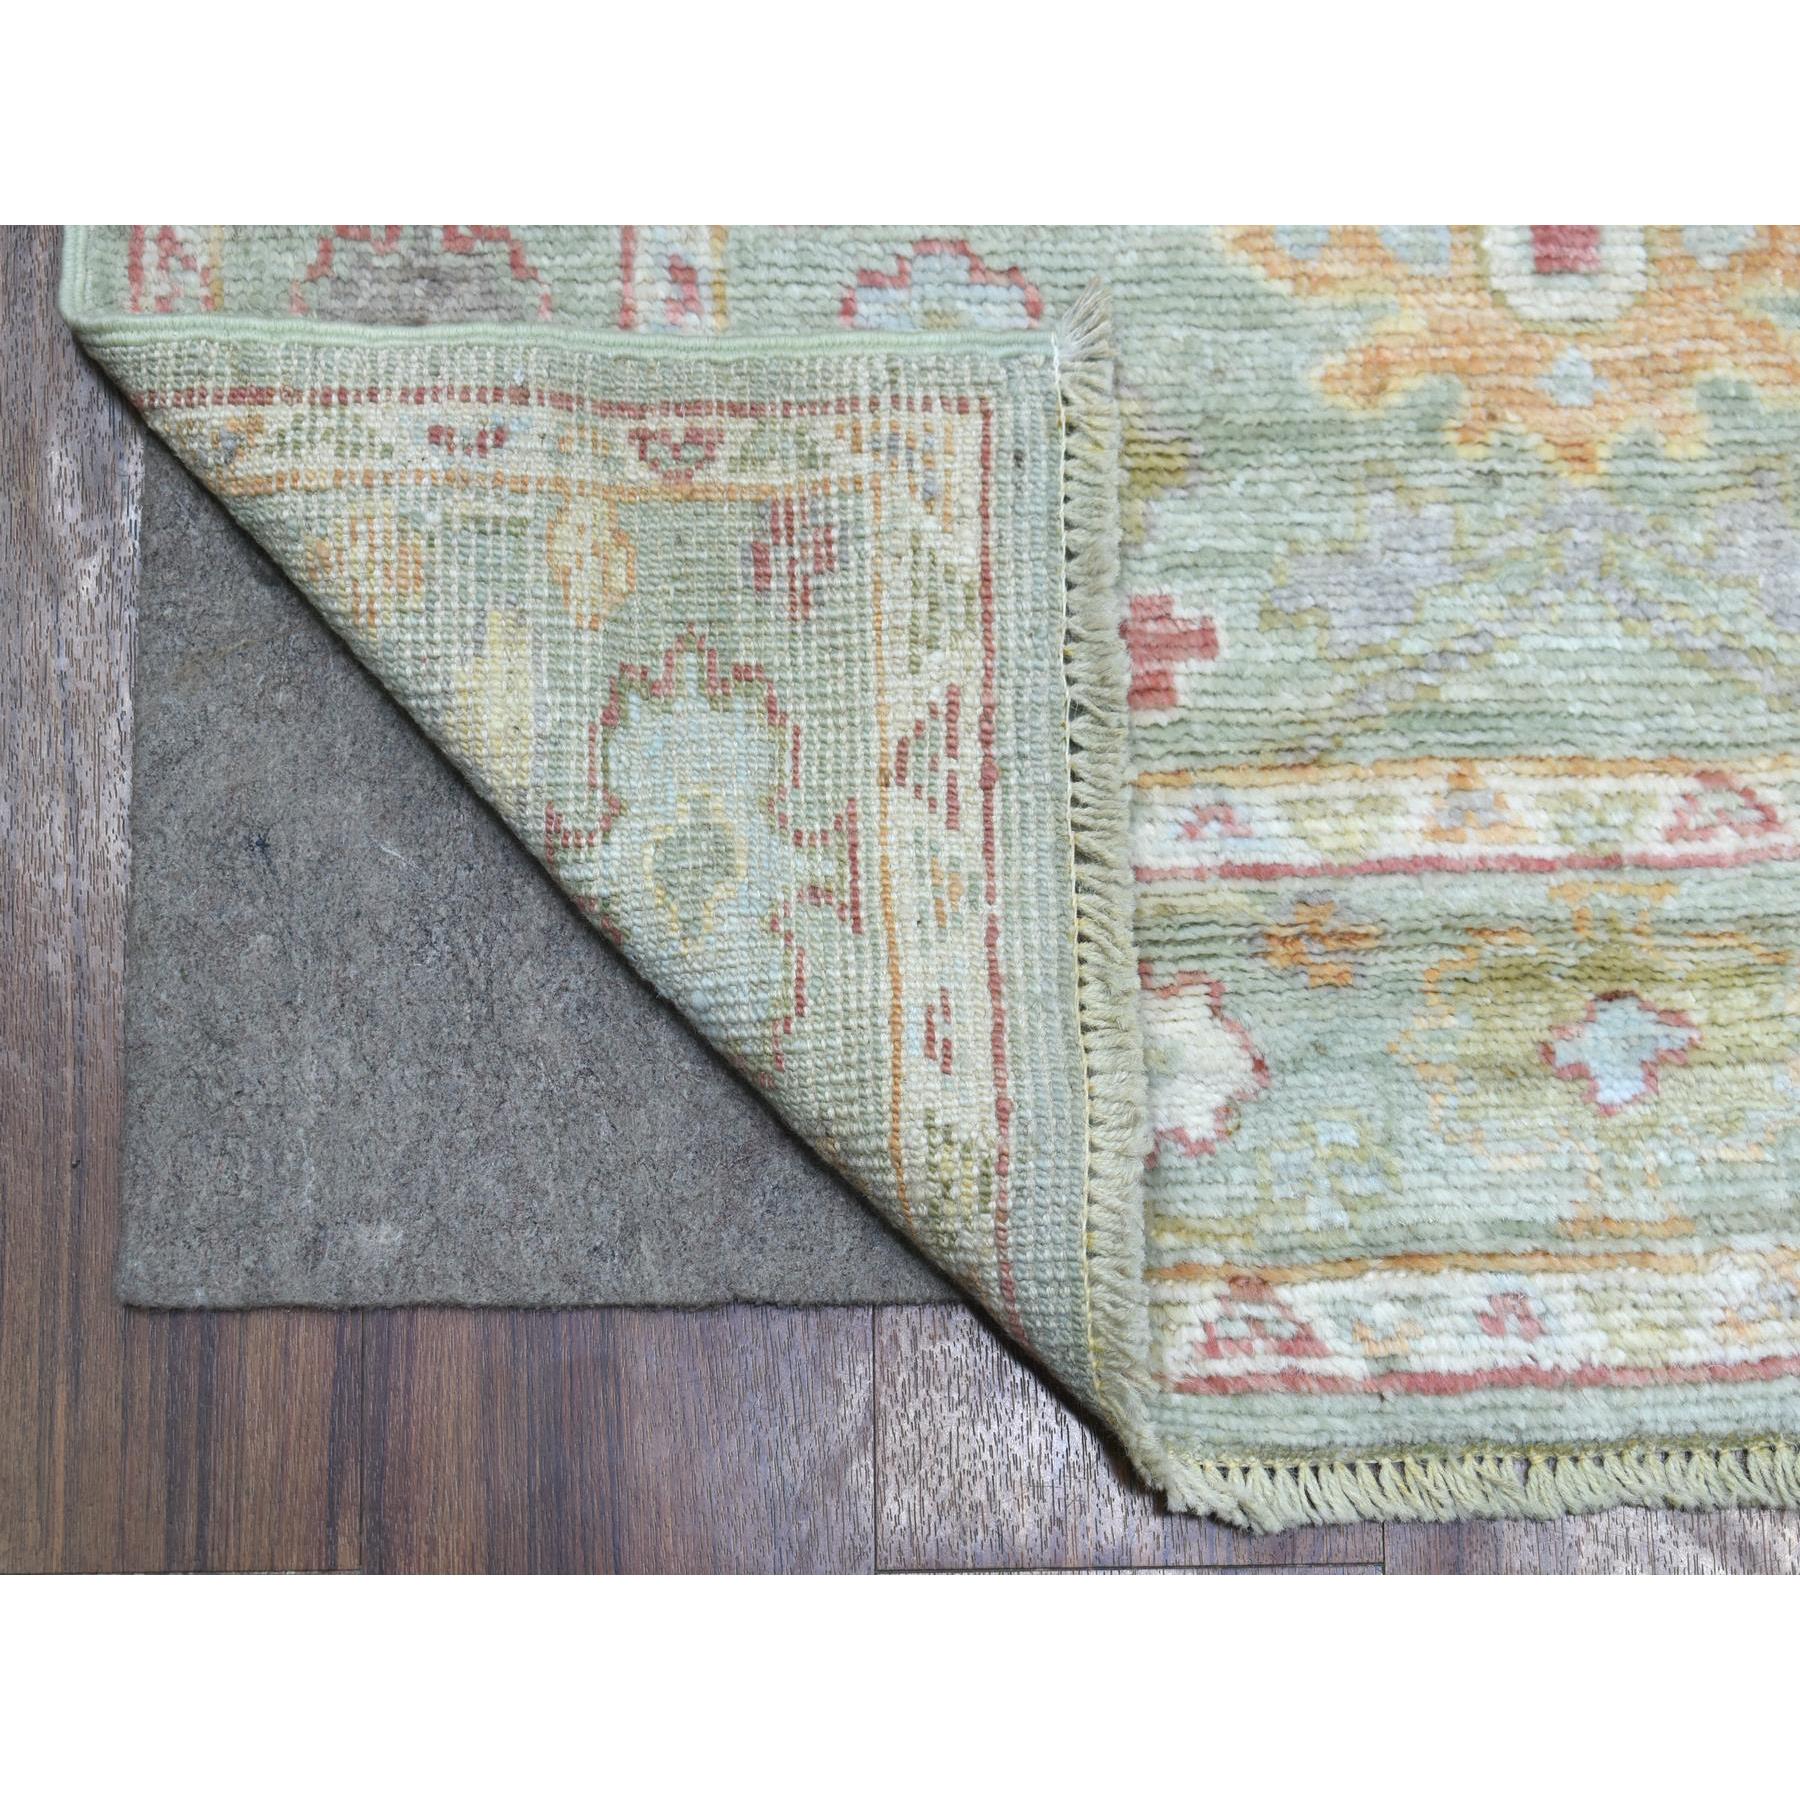 3'1"x13'3" Soft, Afghan Wool Green Angora Ushak with Soft Colors Hand Woven Wide Runner Oriental Rug 